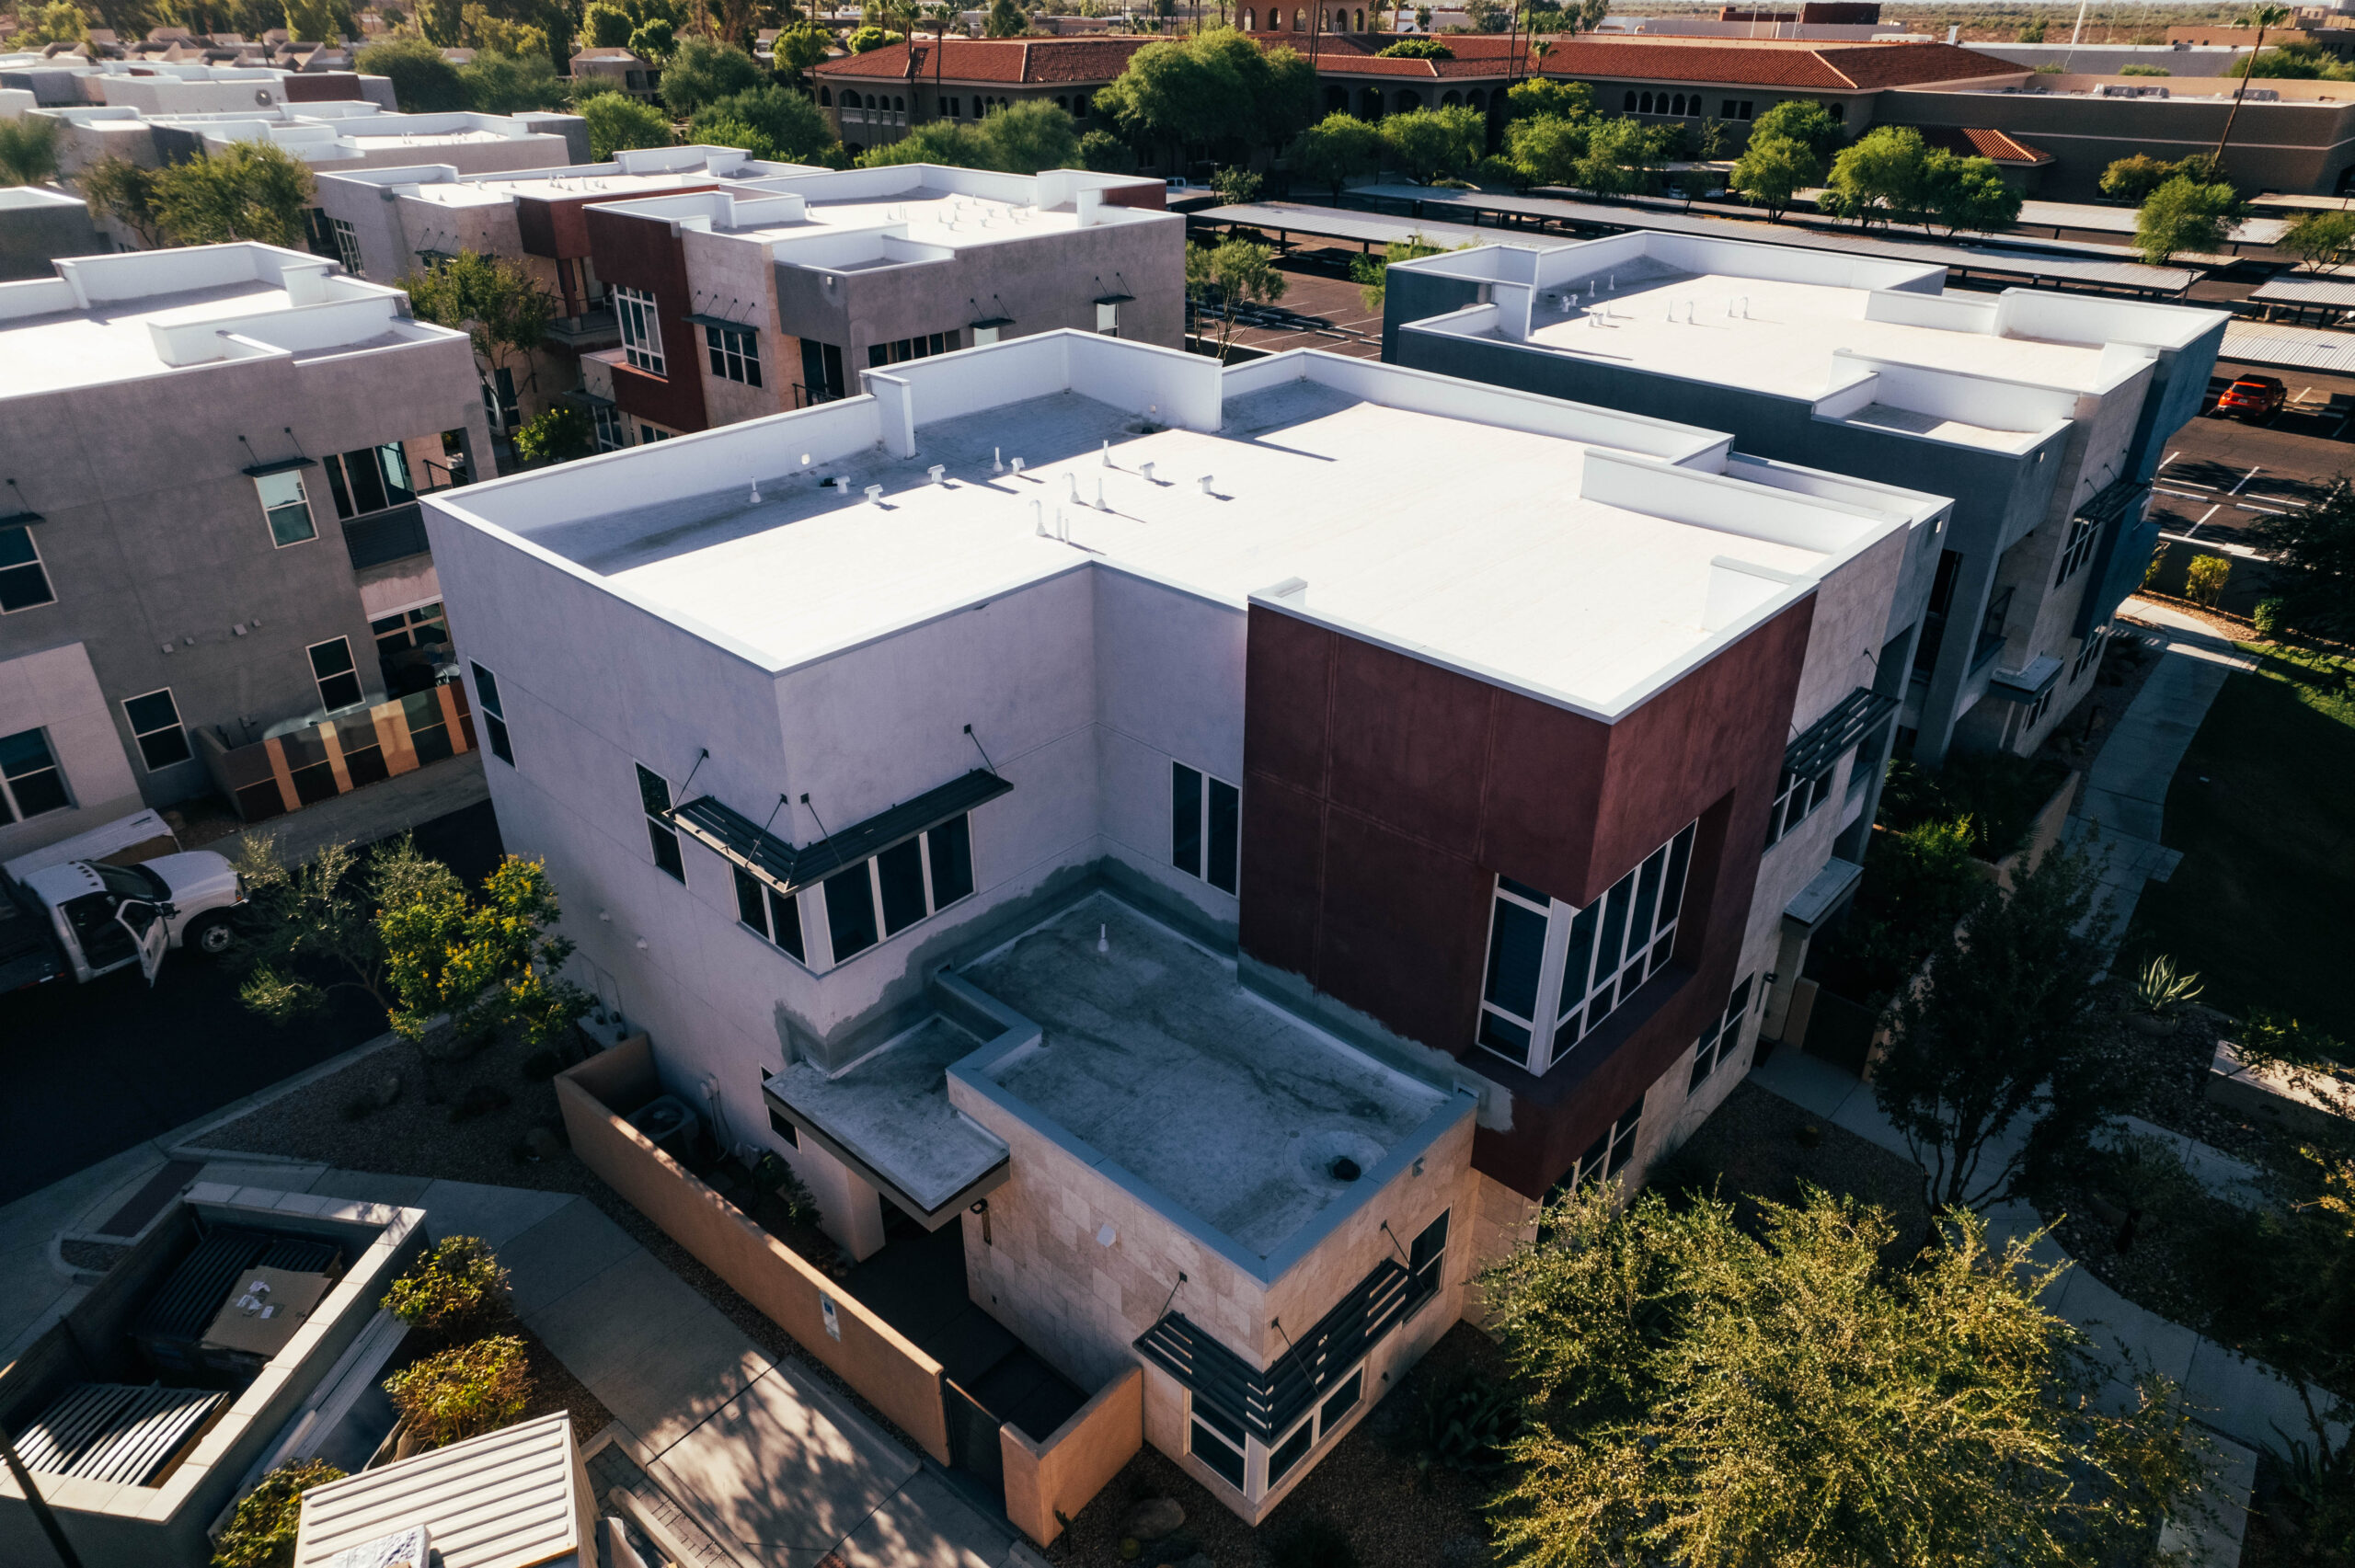 Aerial perspective of a coated flat roof in Carefree, Arizona.